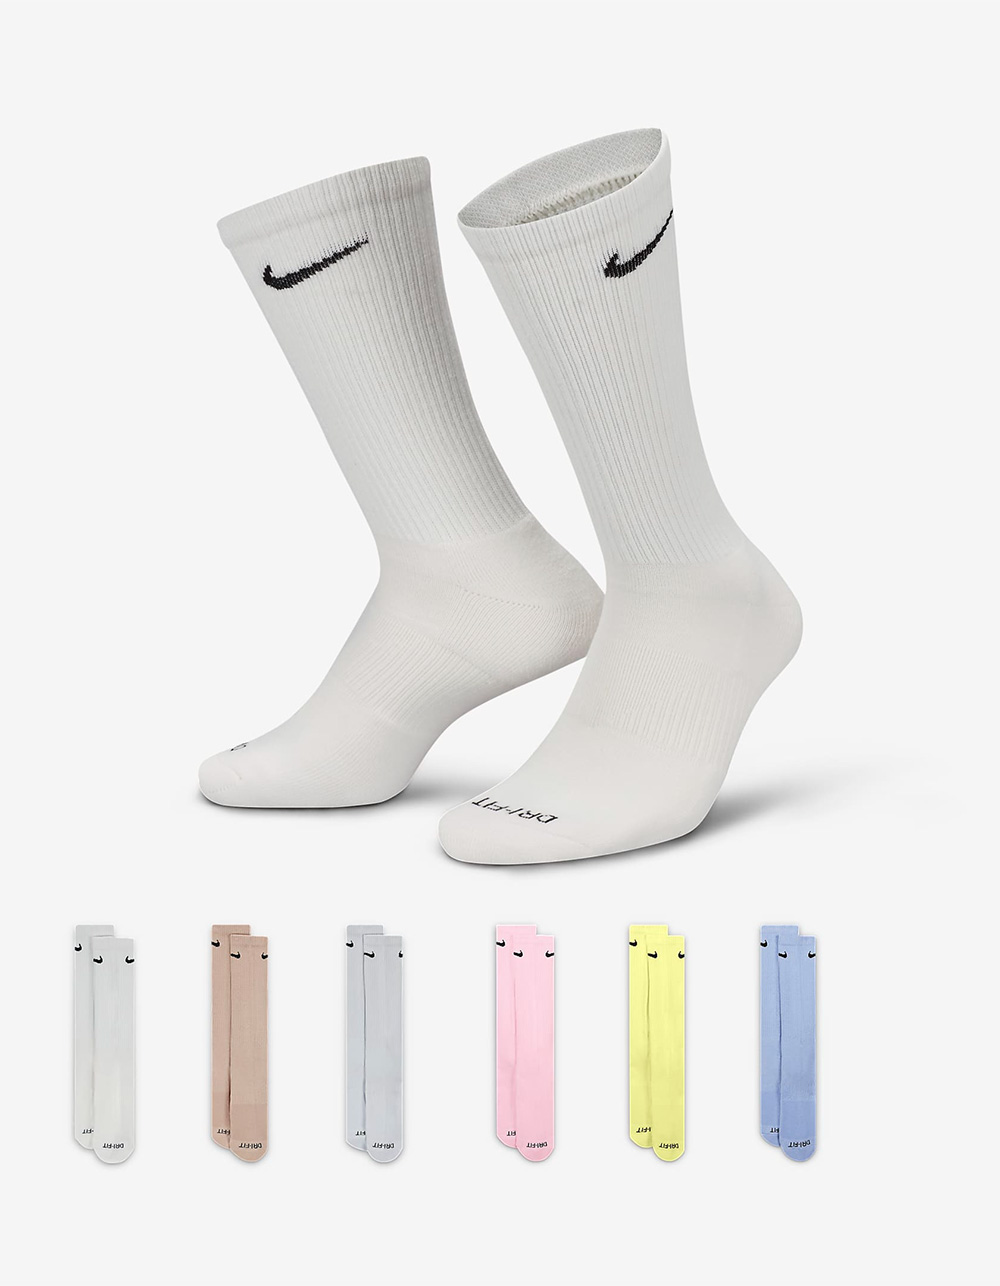 NIKE Everyday Plus Cushioned 6 Pack Crew Socks - WHILE/MULTI | Tillys